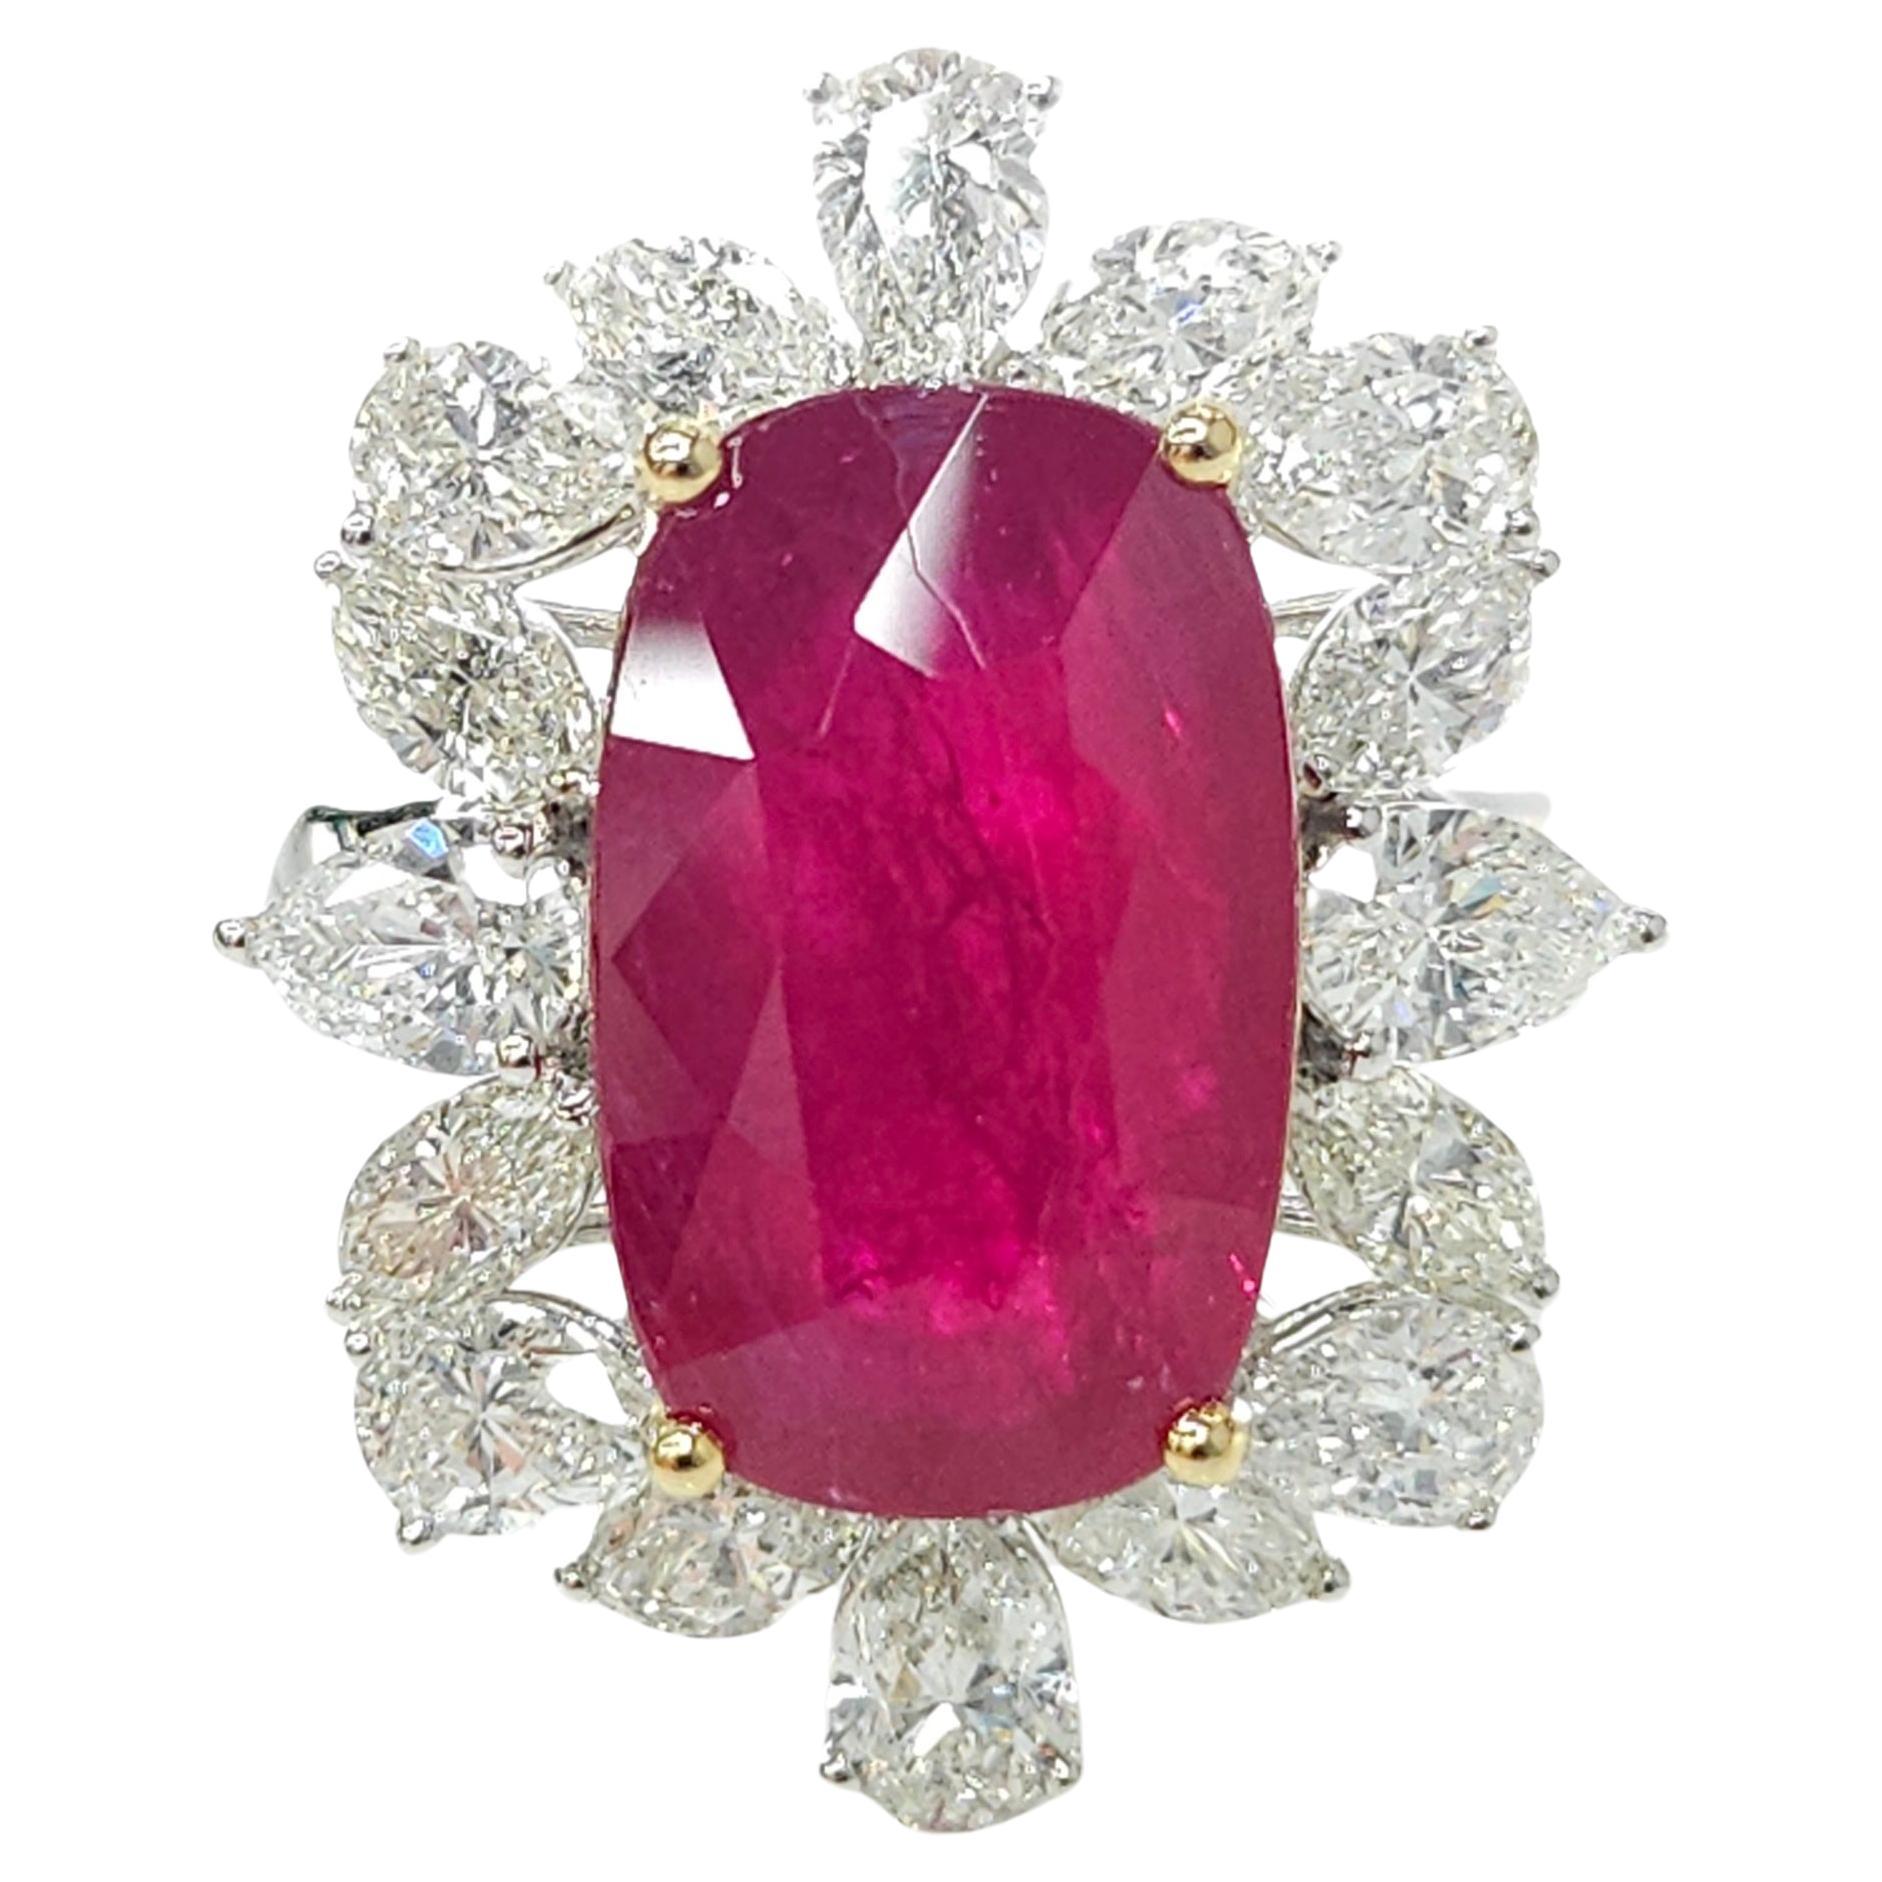 Elevate your jewelry collection with the luxurious allure of this IGI Certified 8.75 Carat ruby ring. This exquisite piece features a deep purplish red ruby, certified by the esteemed International Gemological Institute (IGI), showcasing